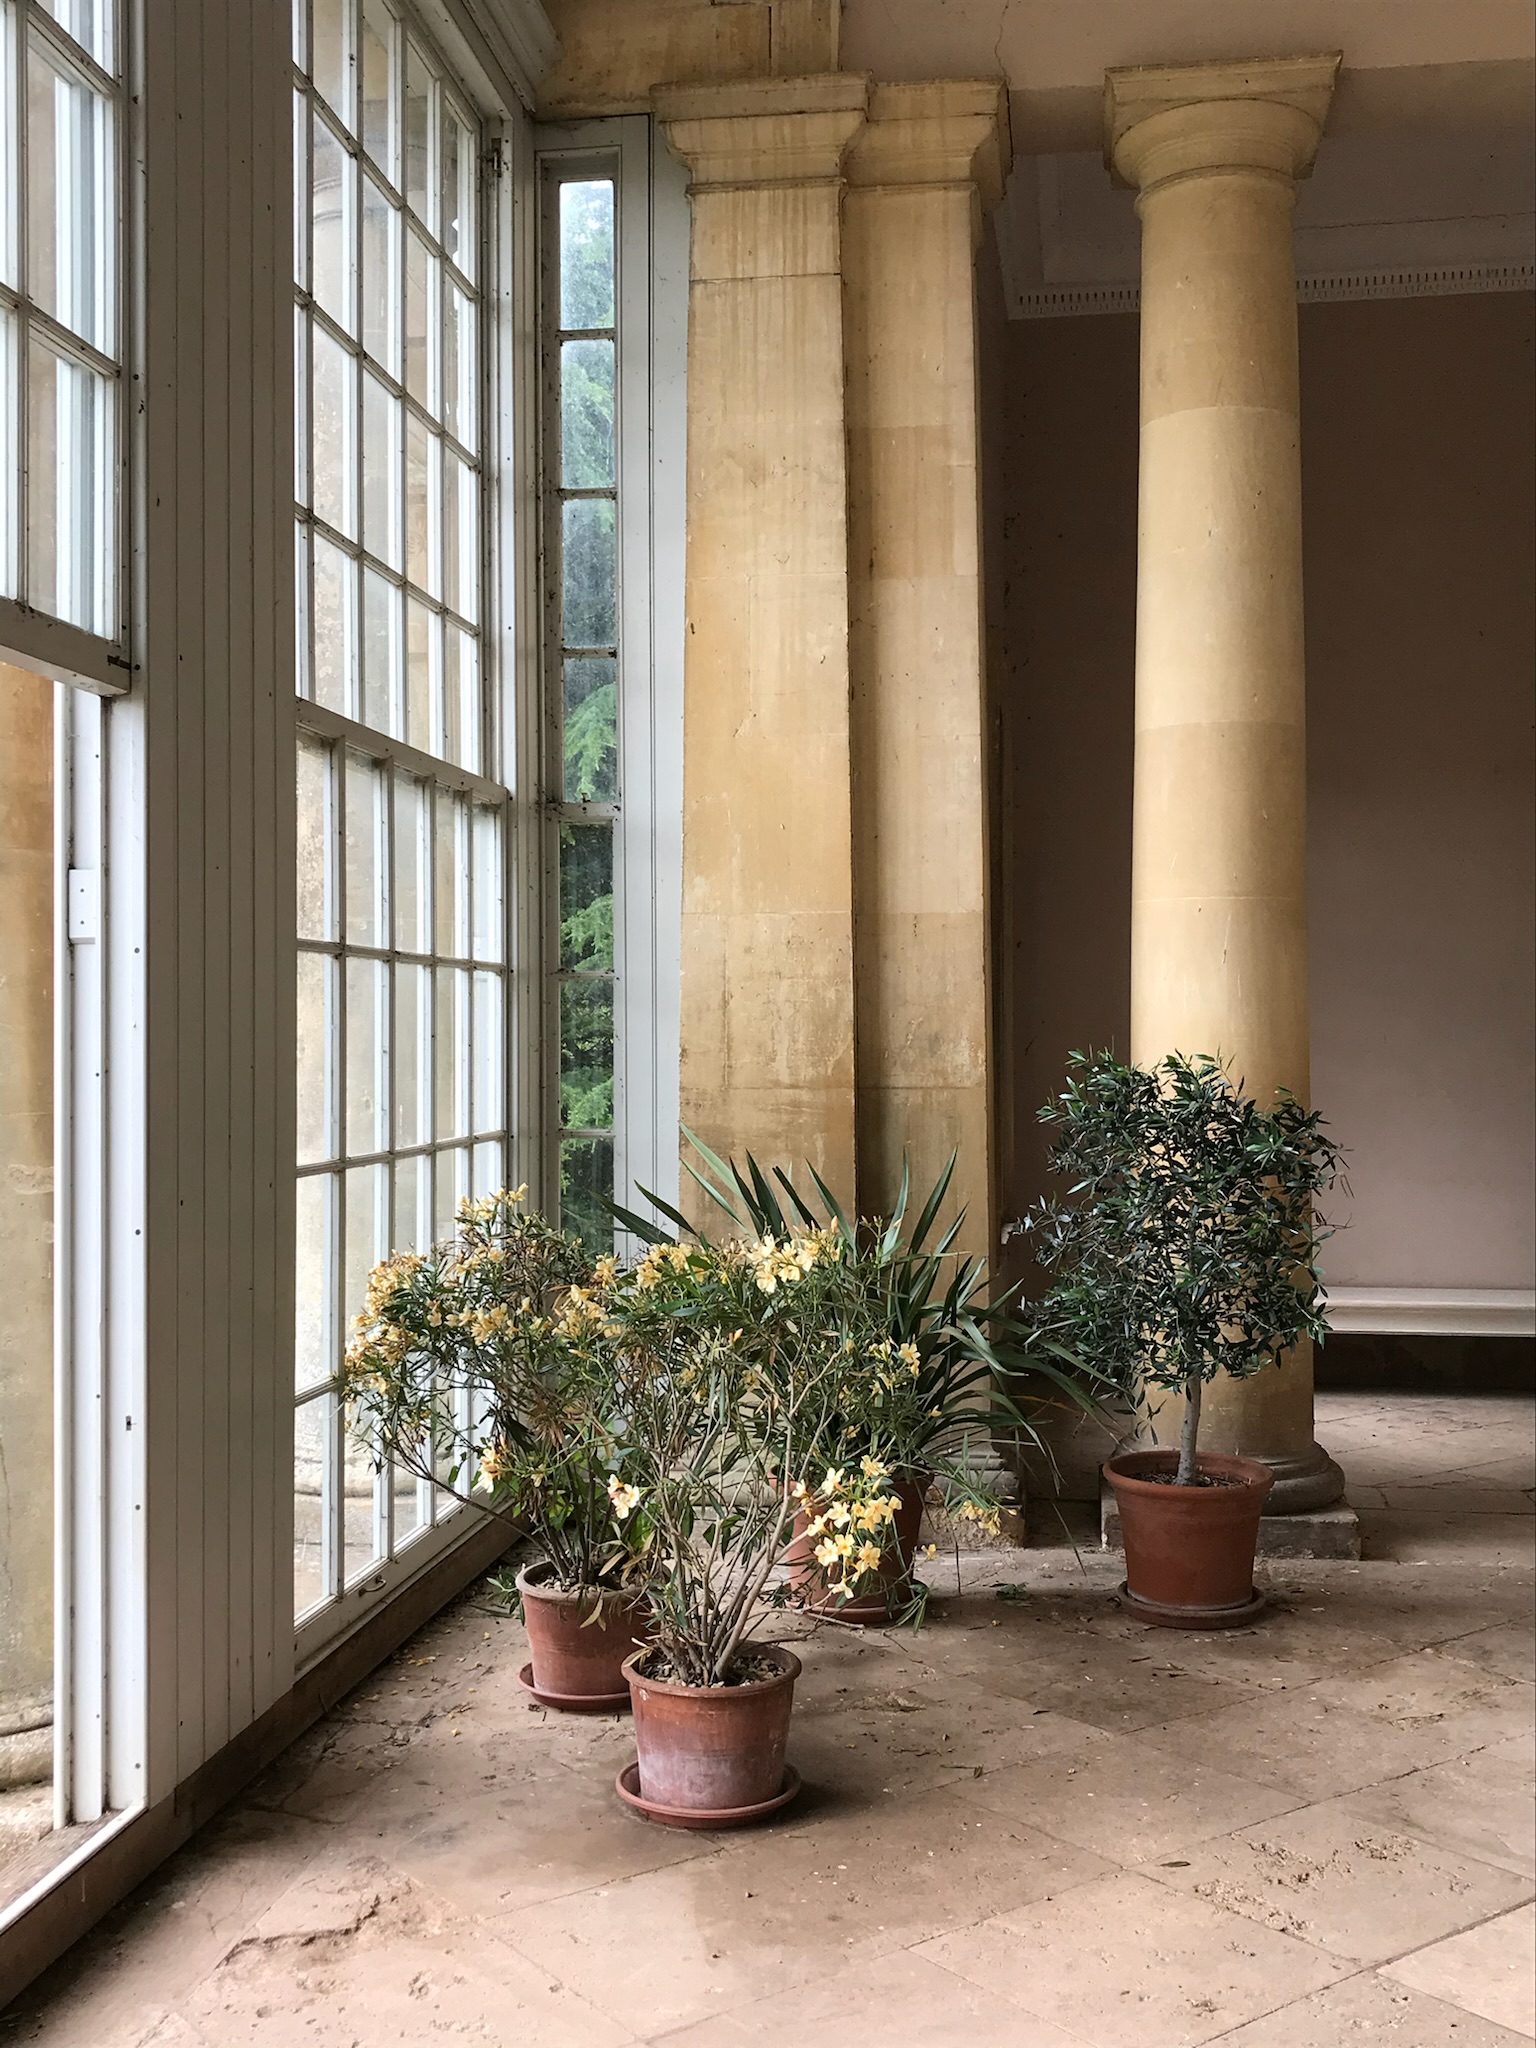 Potted plants inside a grand room with pillars